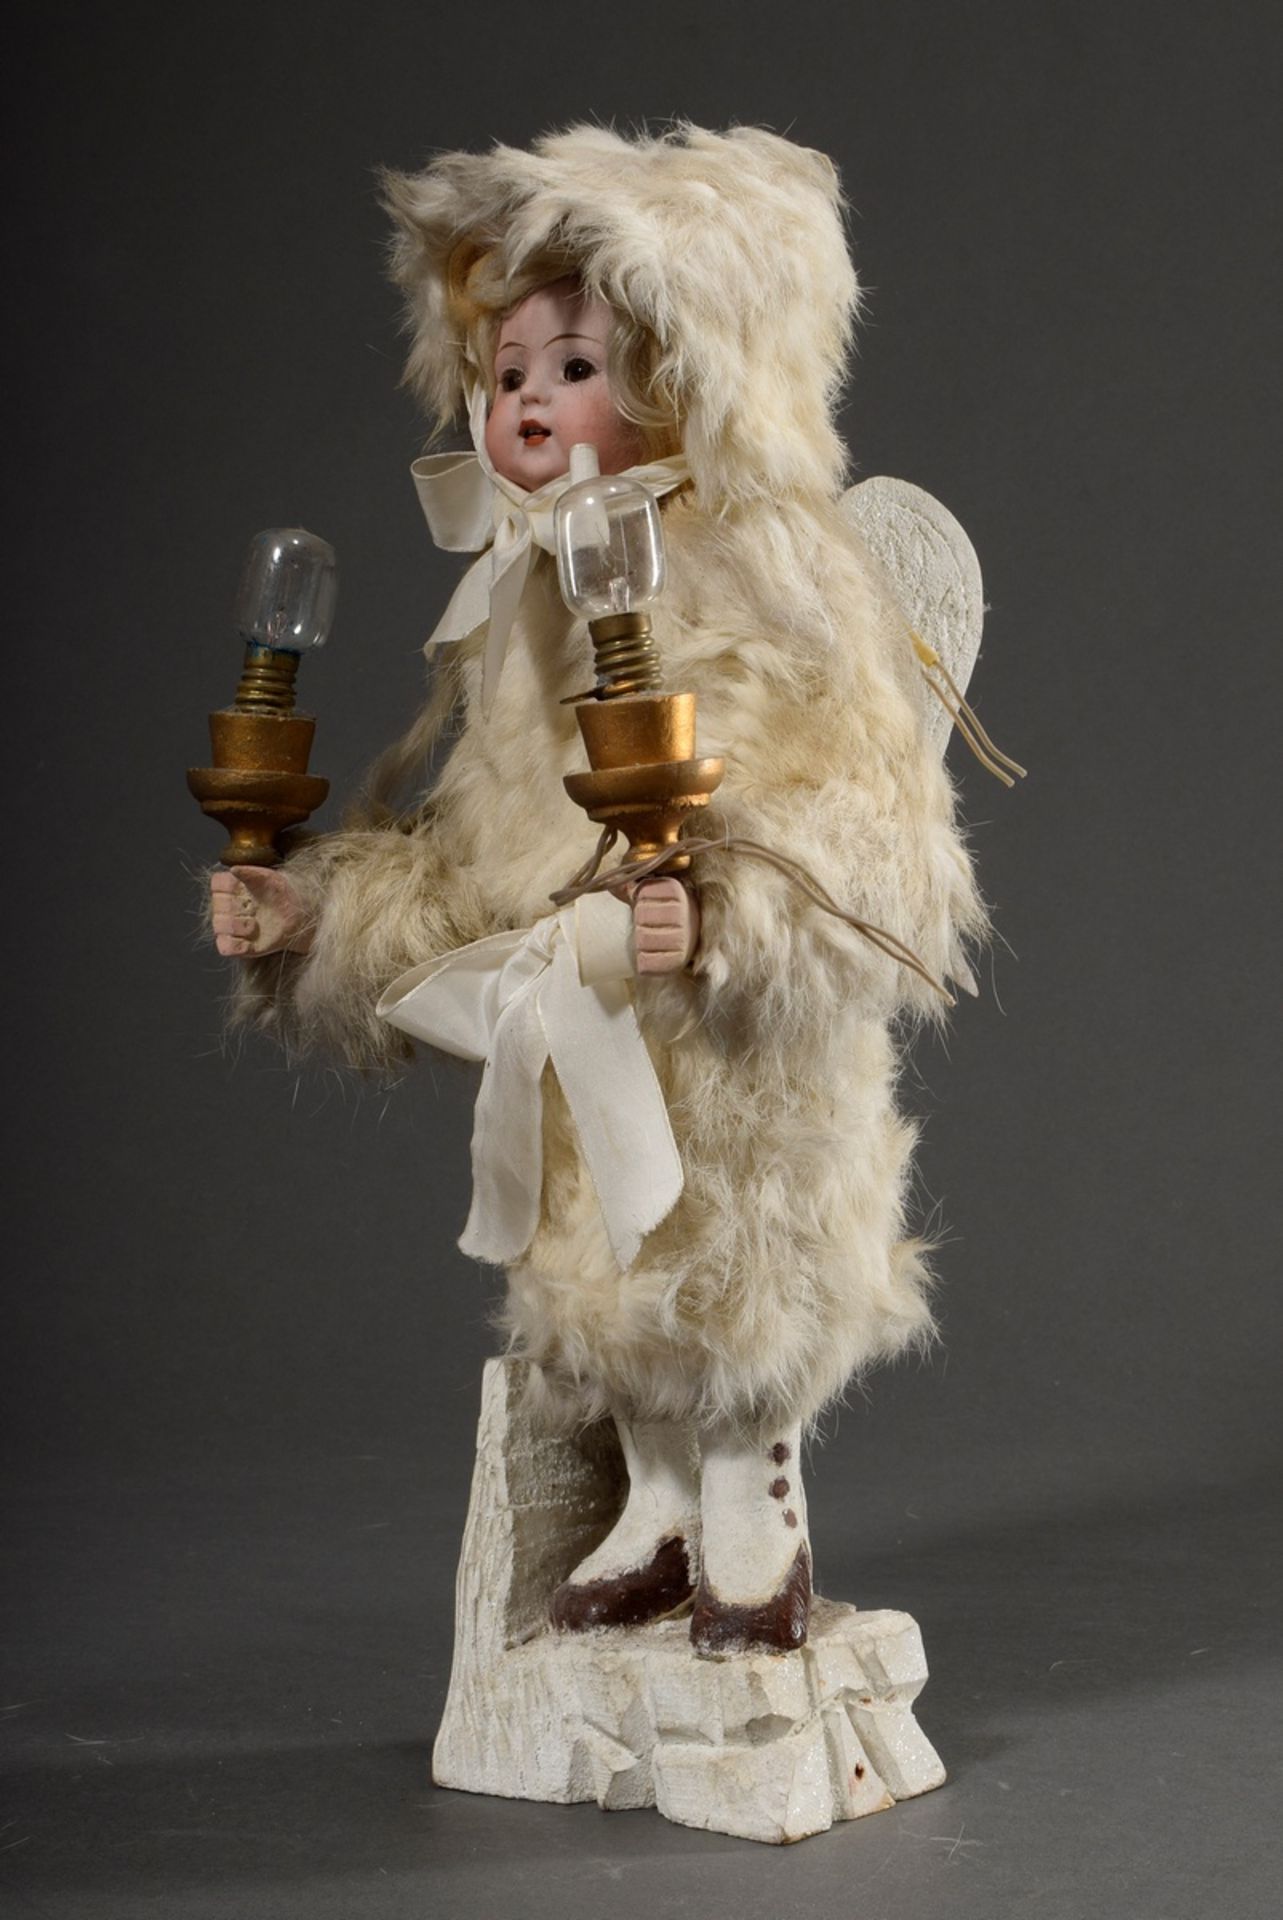 Lamp with "Winter Angel" doll, porcelain crank head and jointed body, real hair wig, glass eyes, op - Image 3 of 7